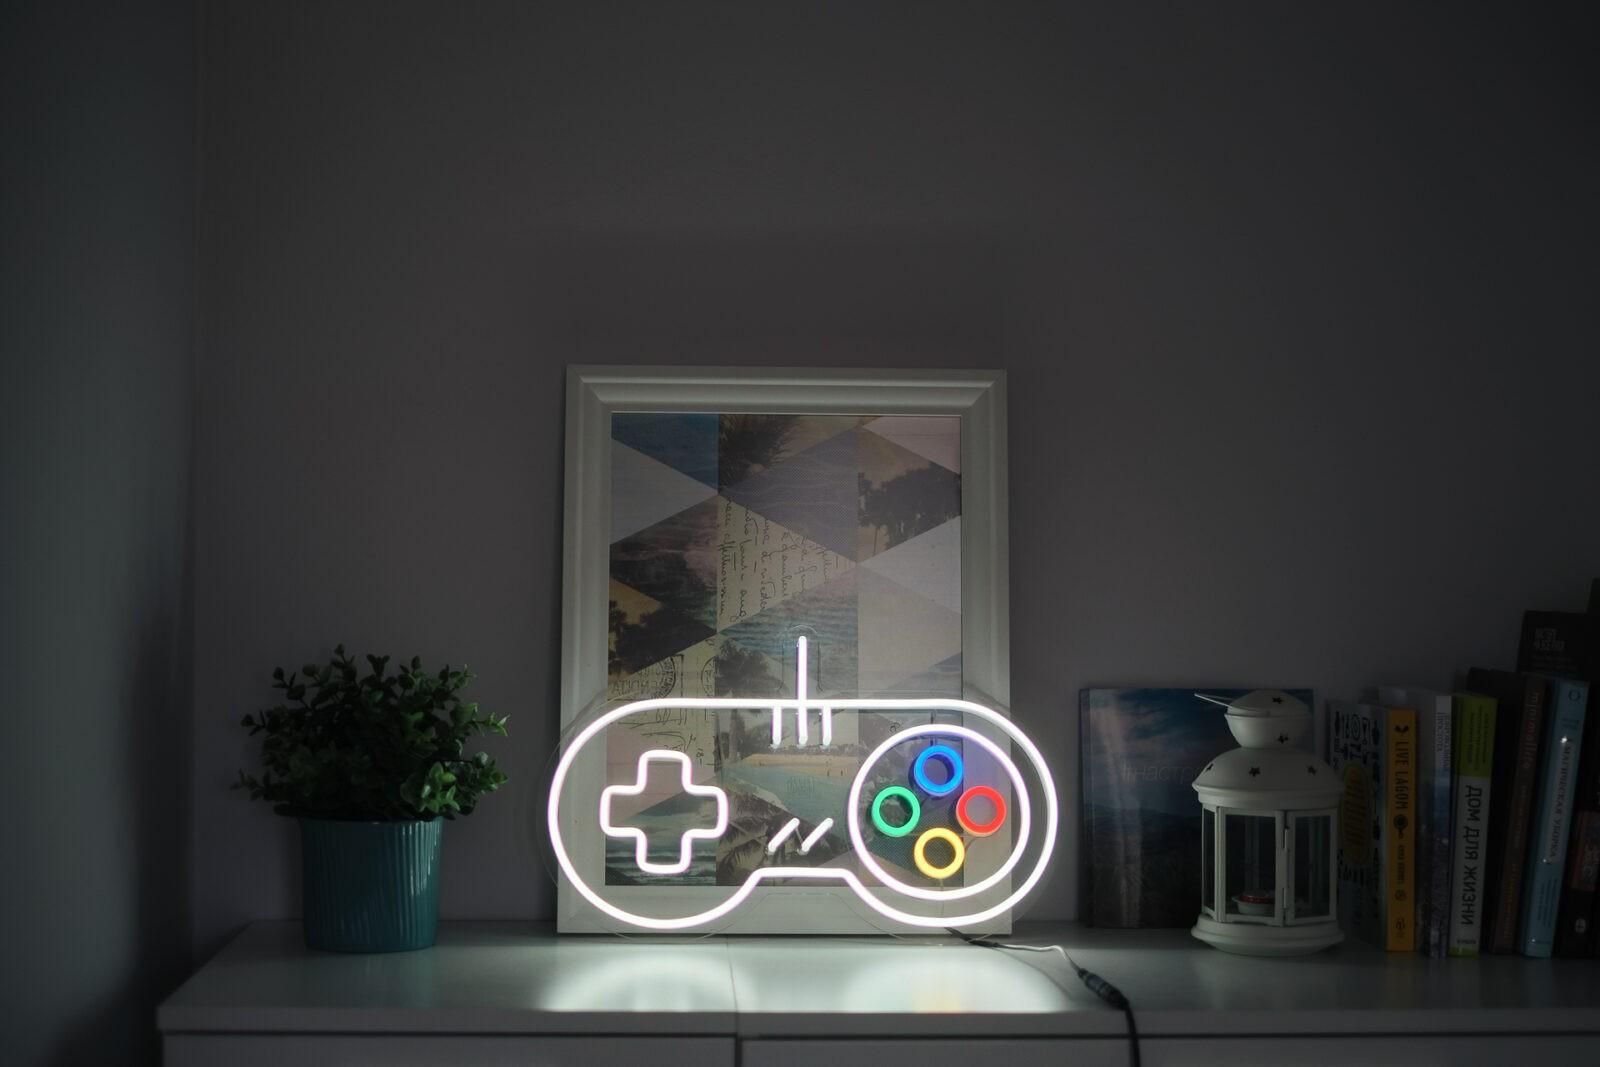 Game Console Neon Sign